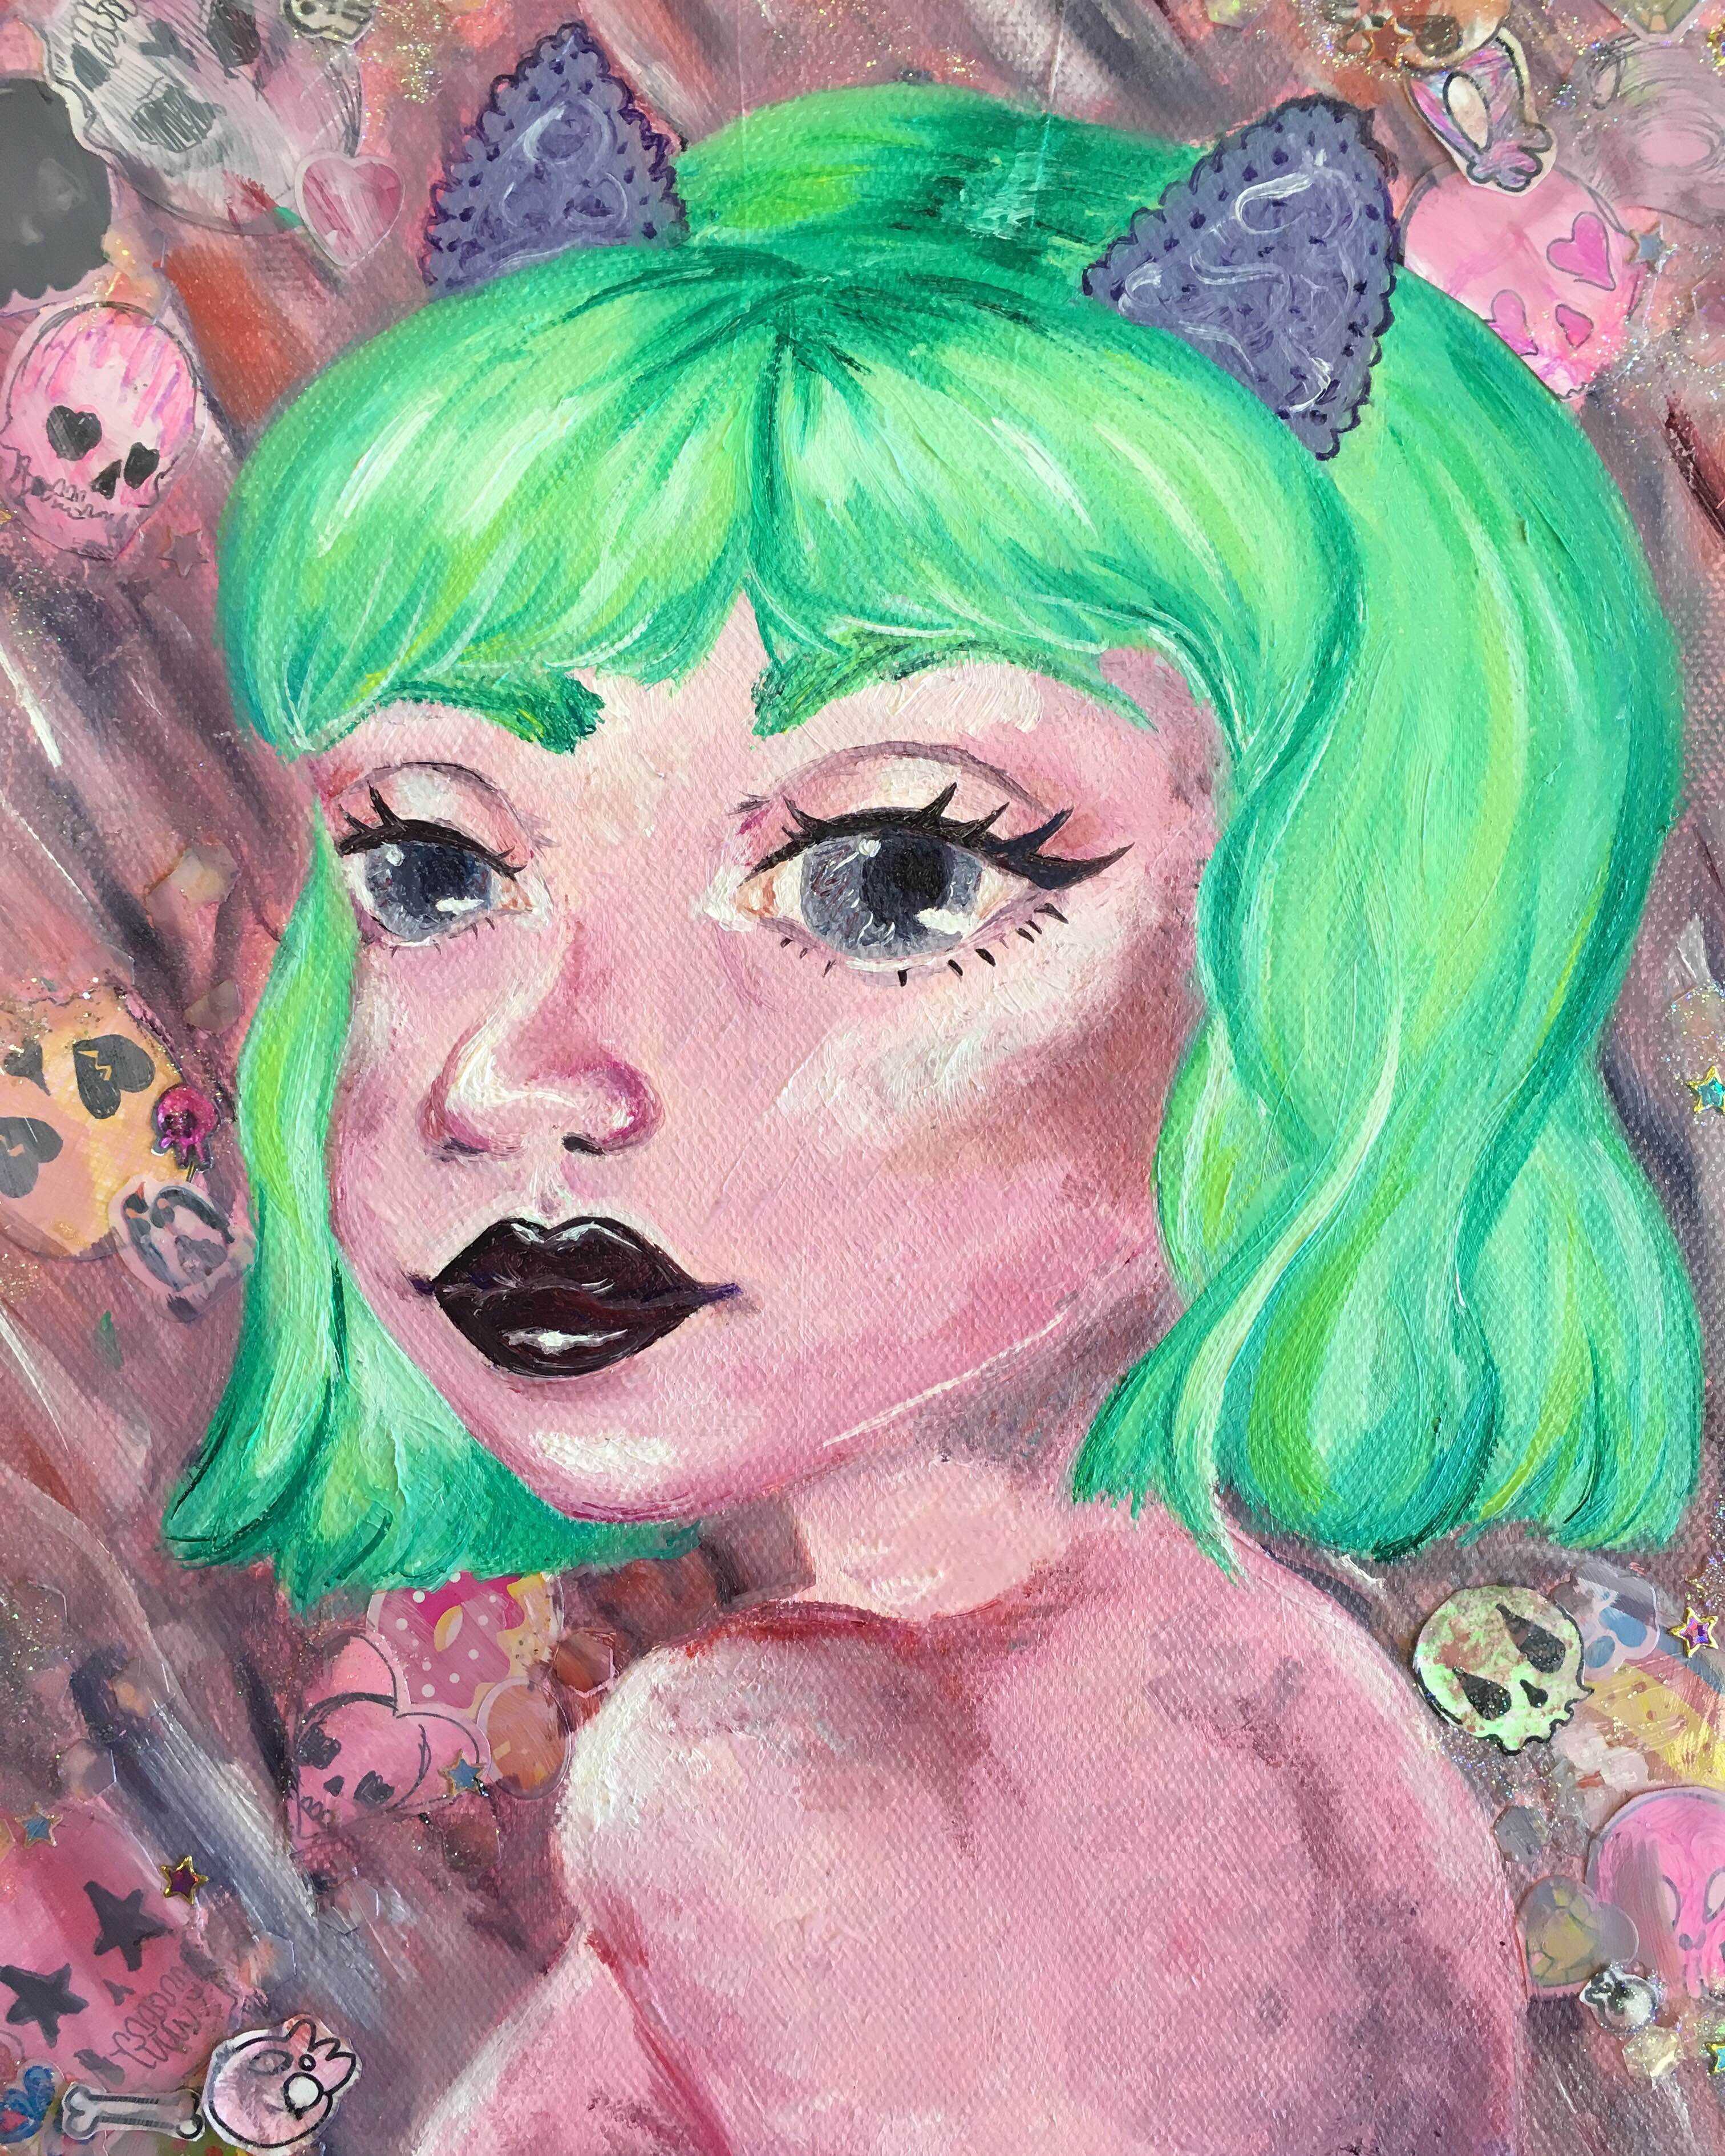 Illustration+of+a+girl+with+green+hair+and+cat+ears+surrounded+by+skulls